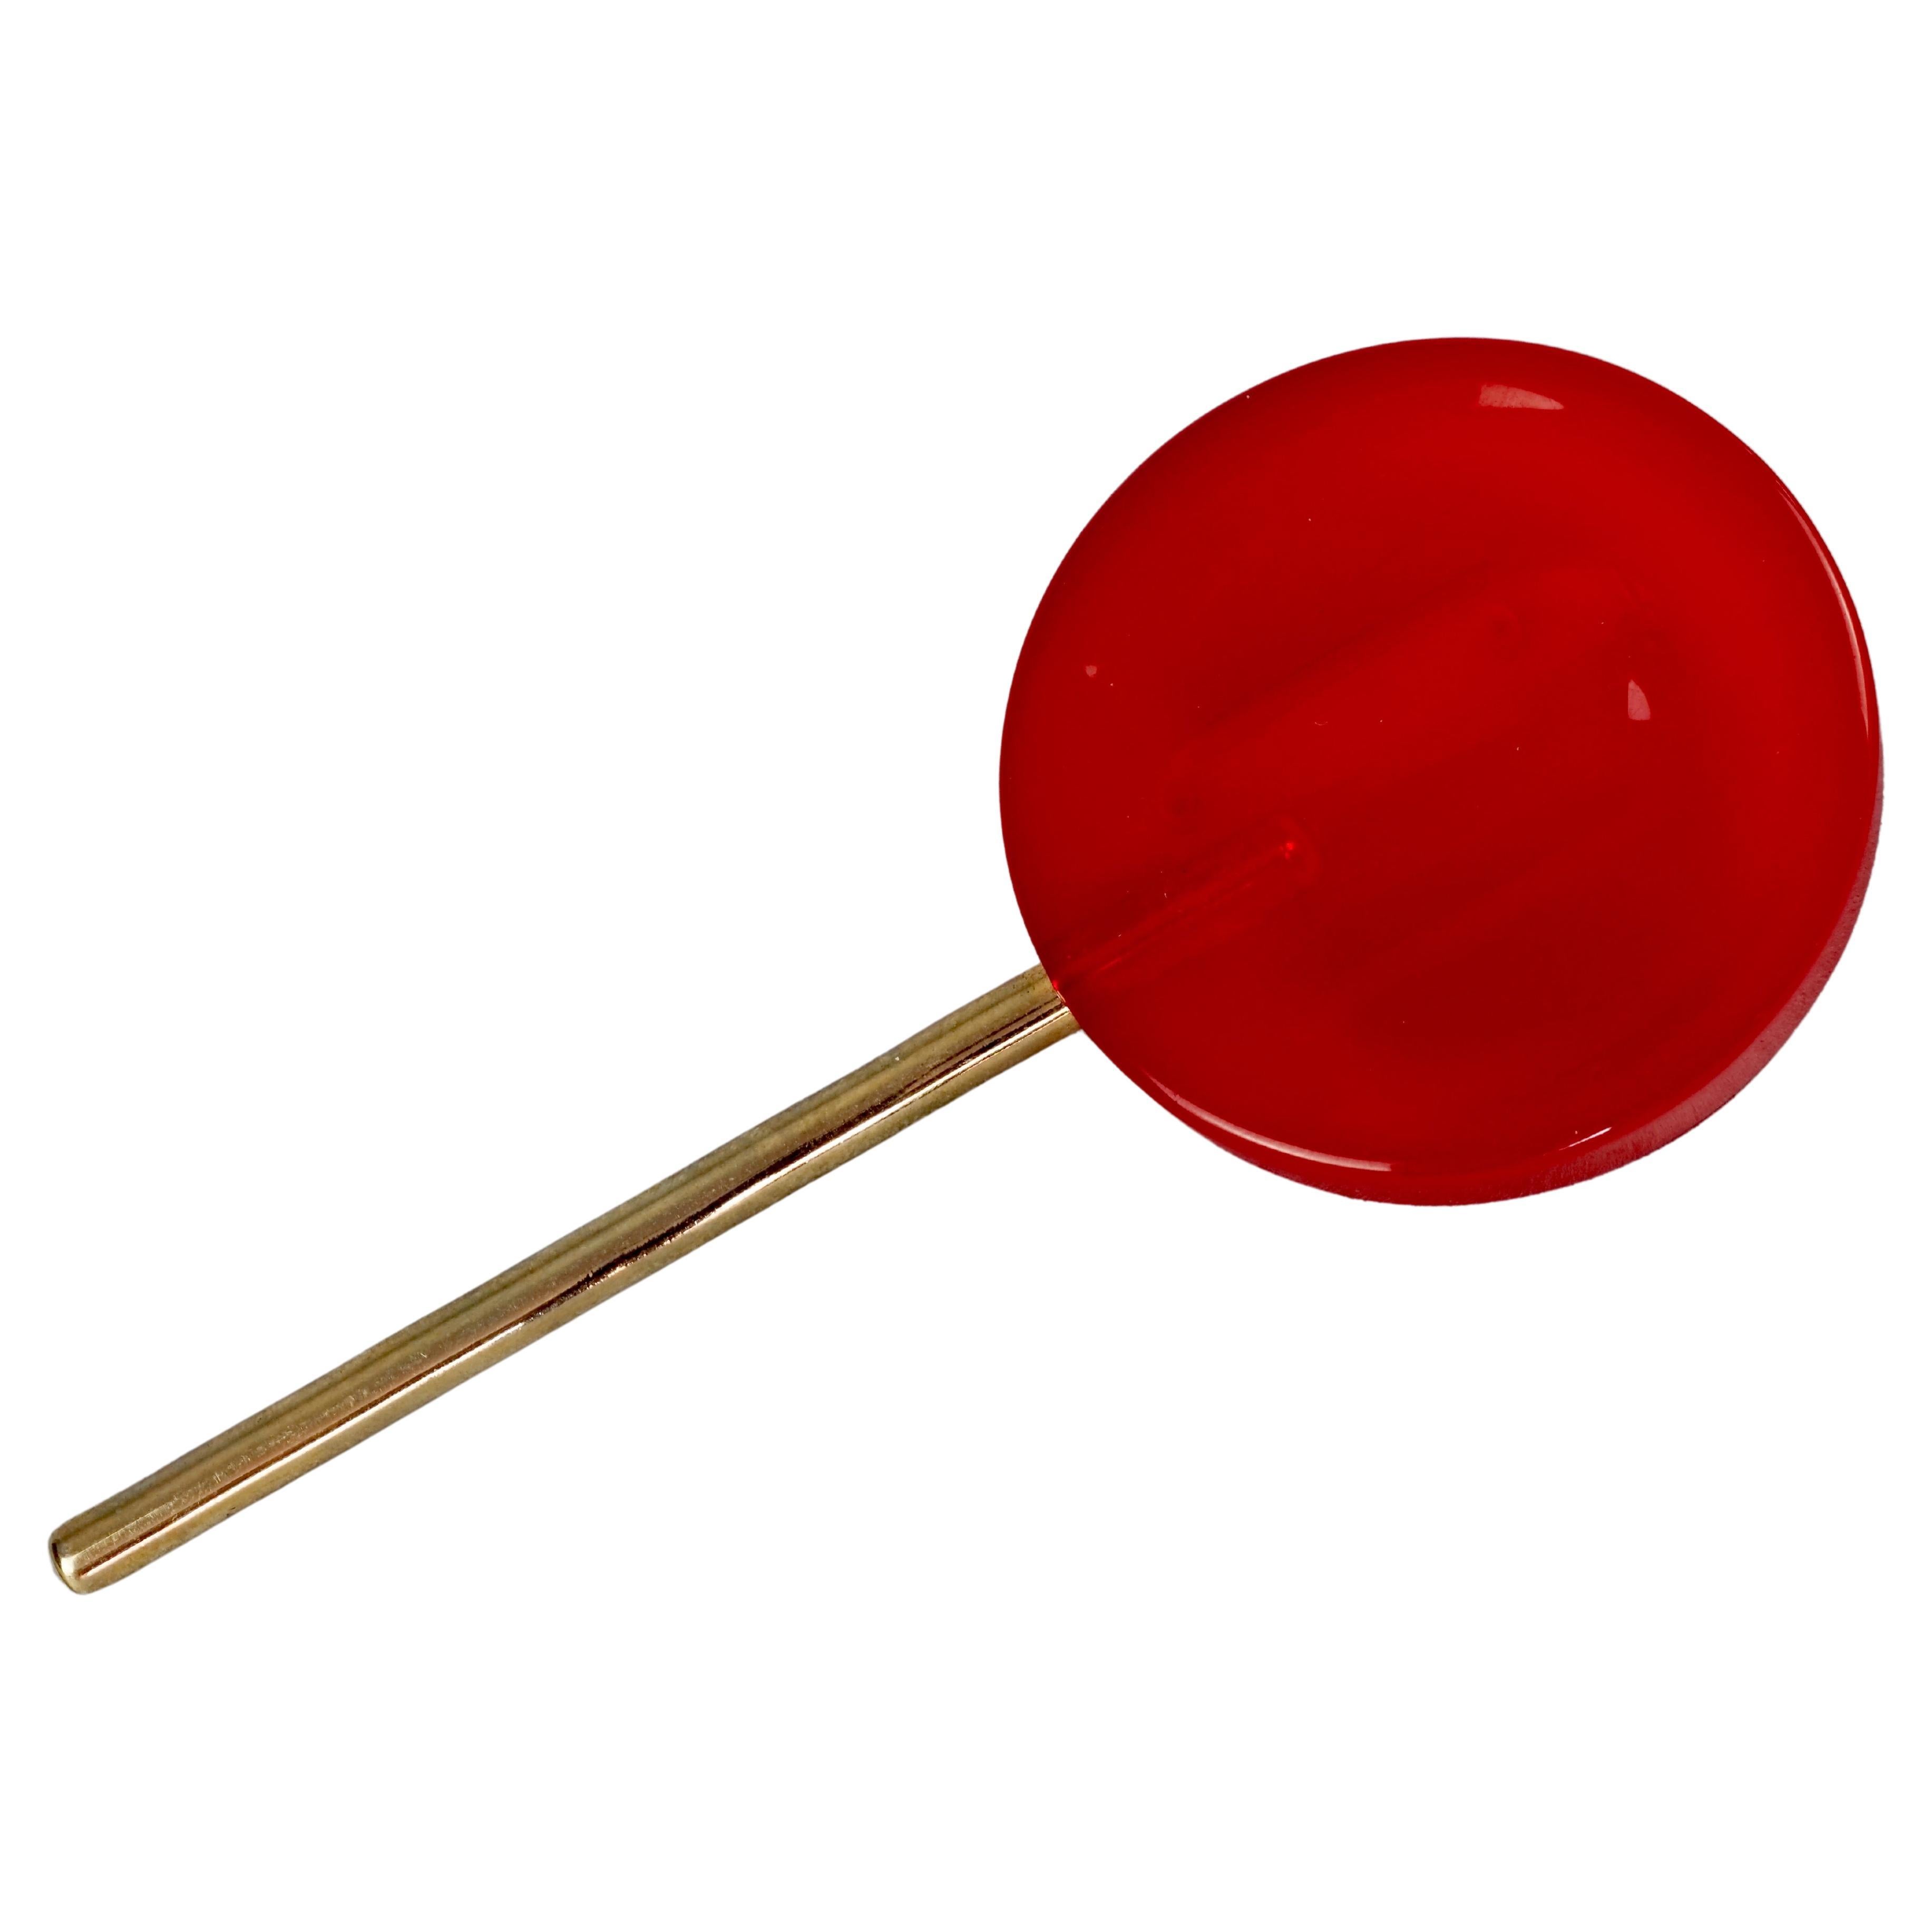 Vintage MOSCHINO Red Cherry Lollipop Candy Novelty Brooch For Sale